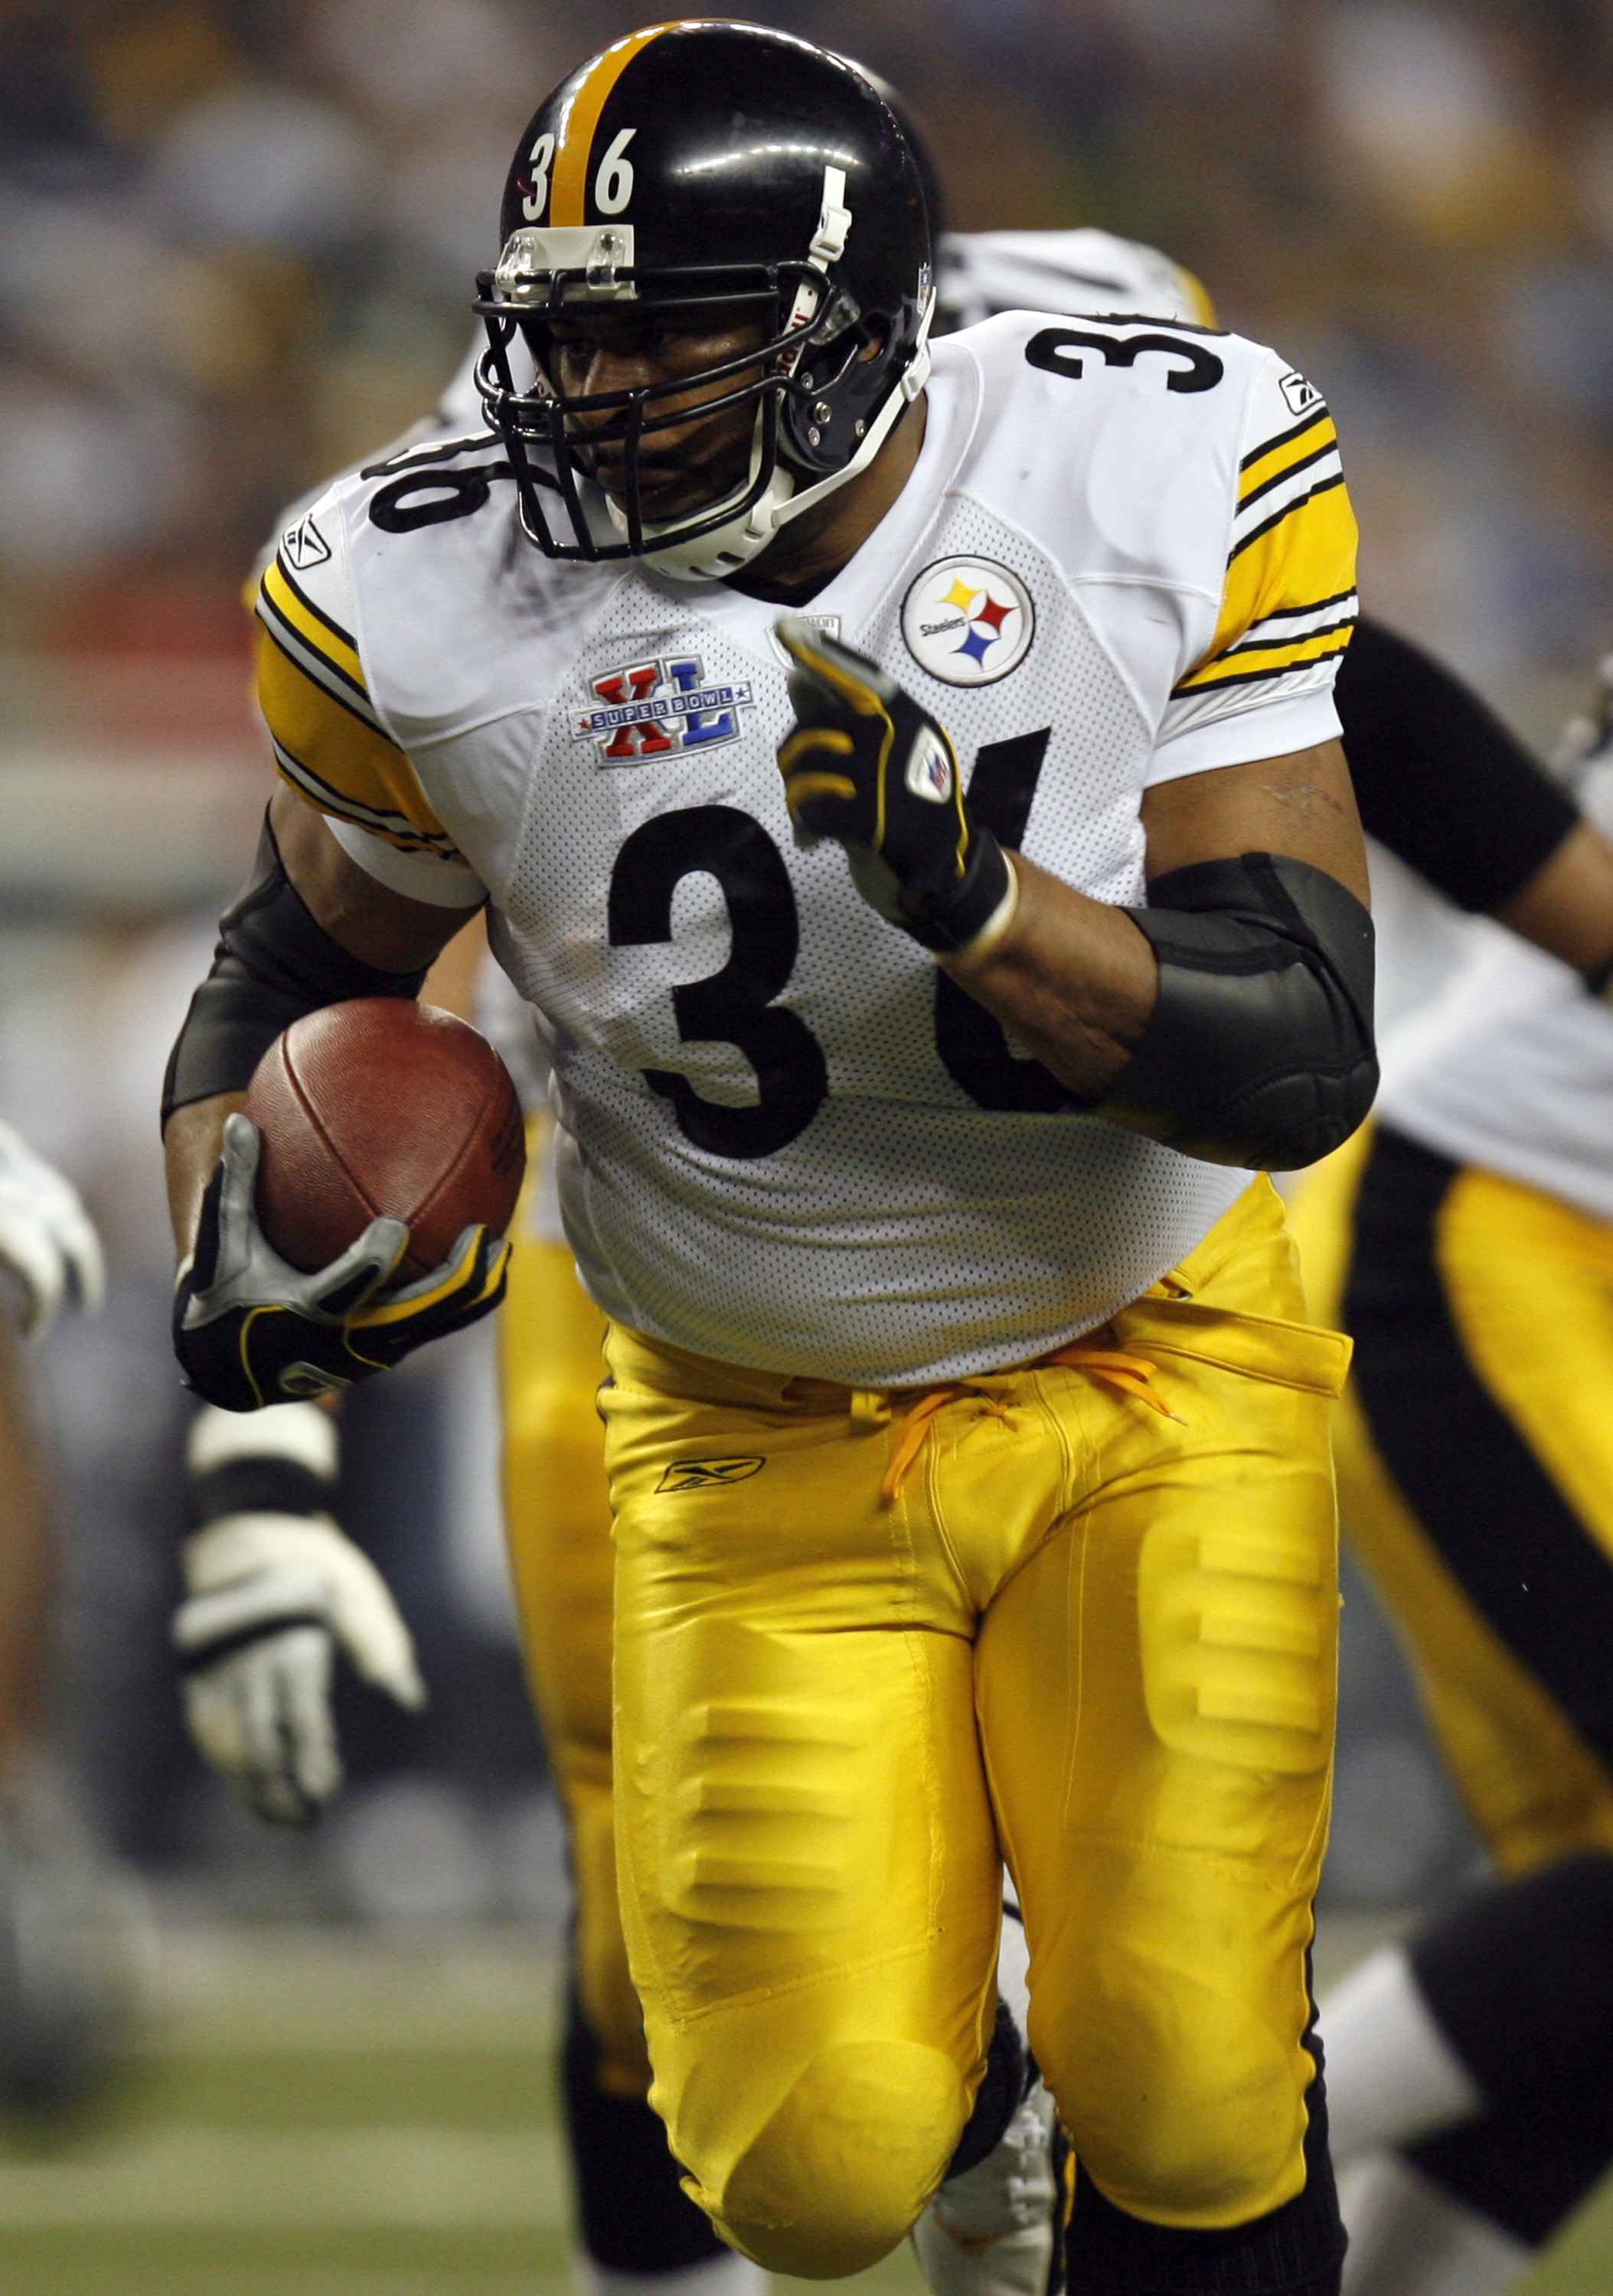 Running back Jerome Bettis of the Pittsburgh Steelers looks for